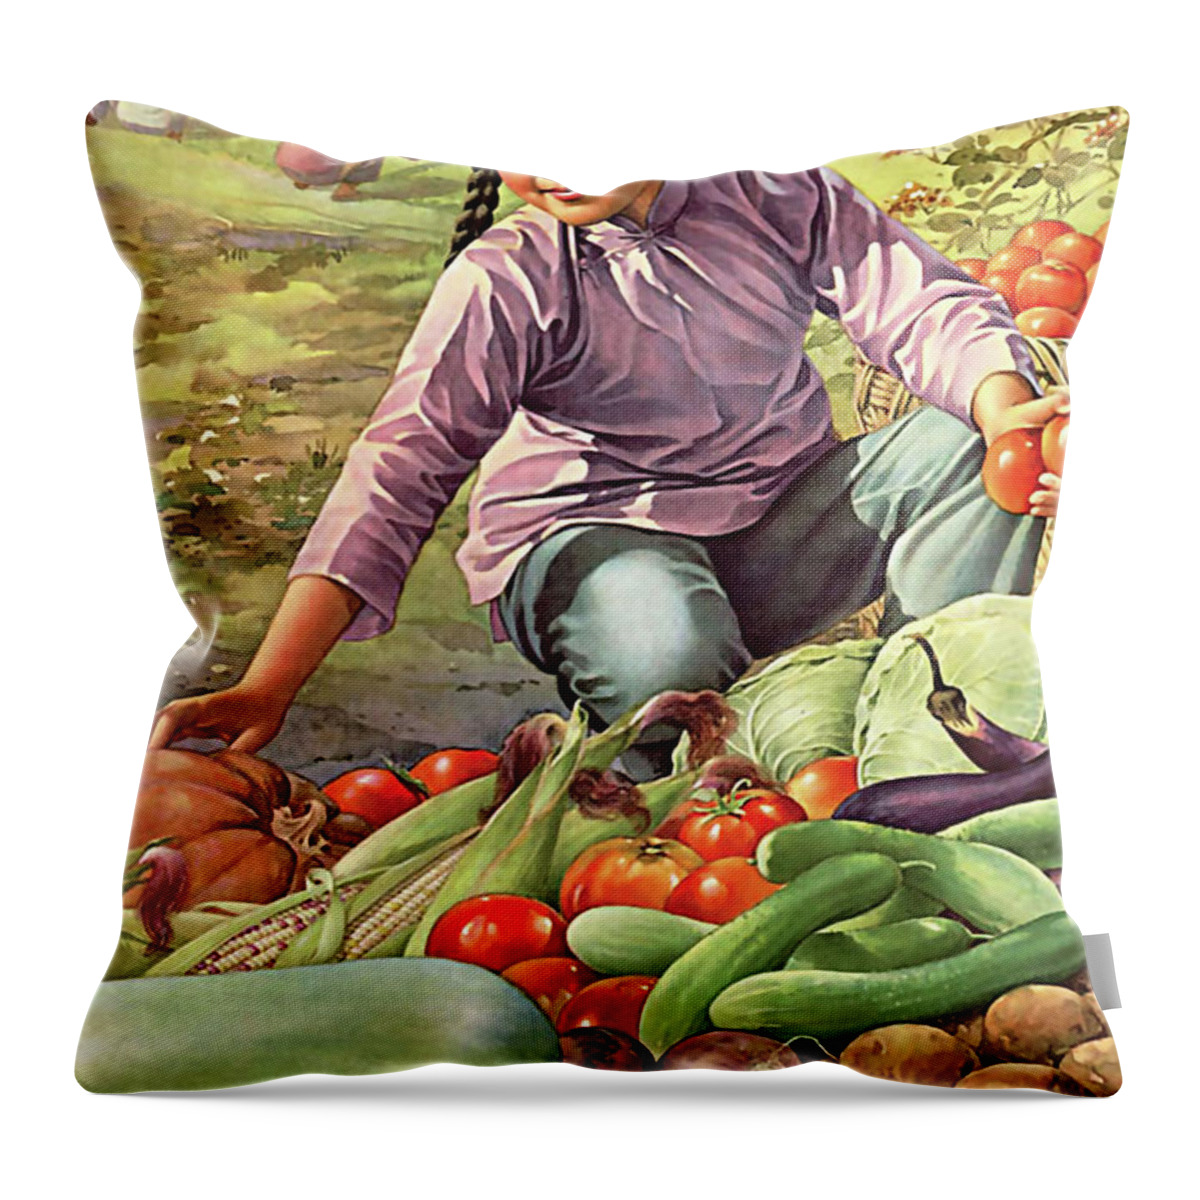 China Throw Pillow featuring the digital art Chinese Girl on a Farm by Long Shot